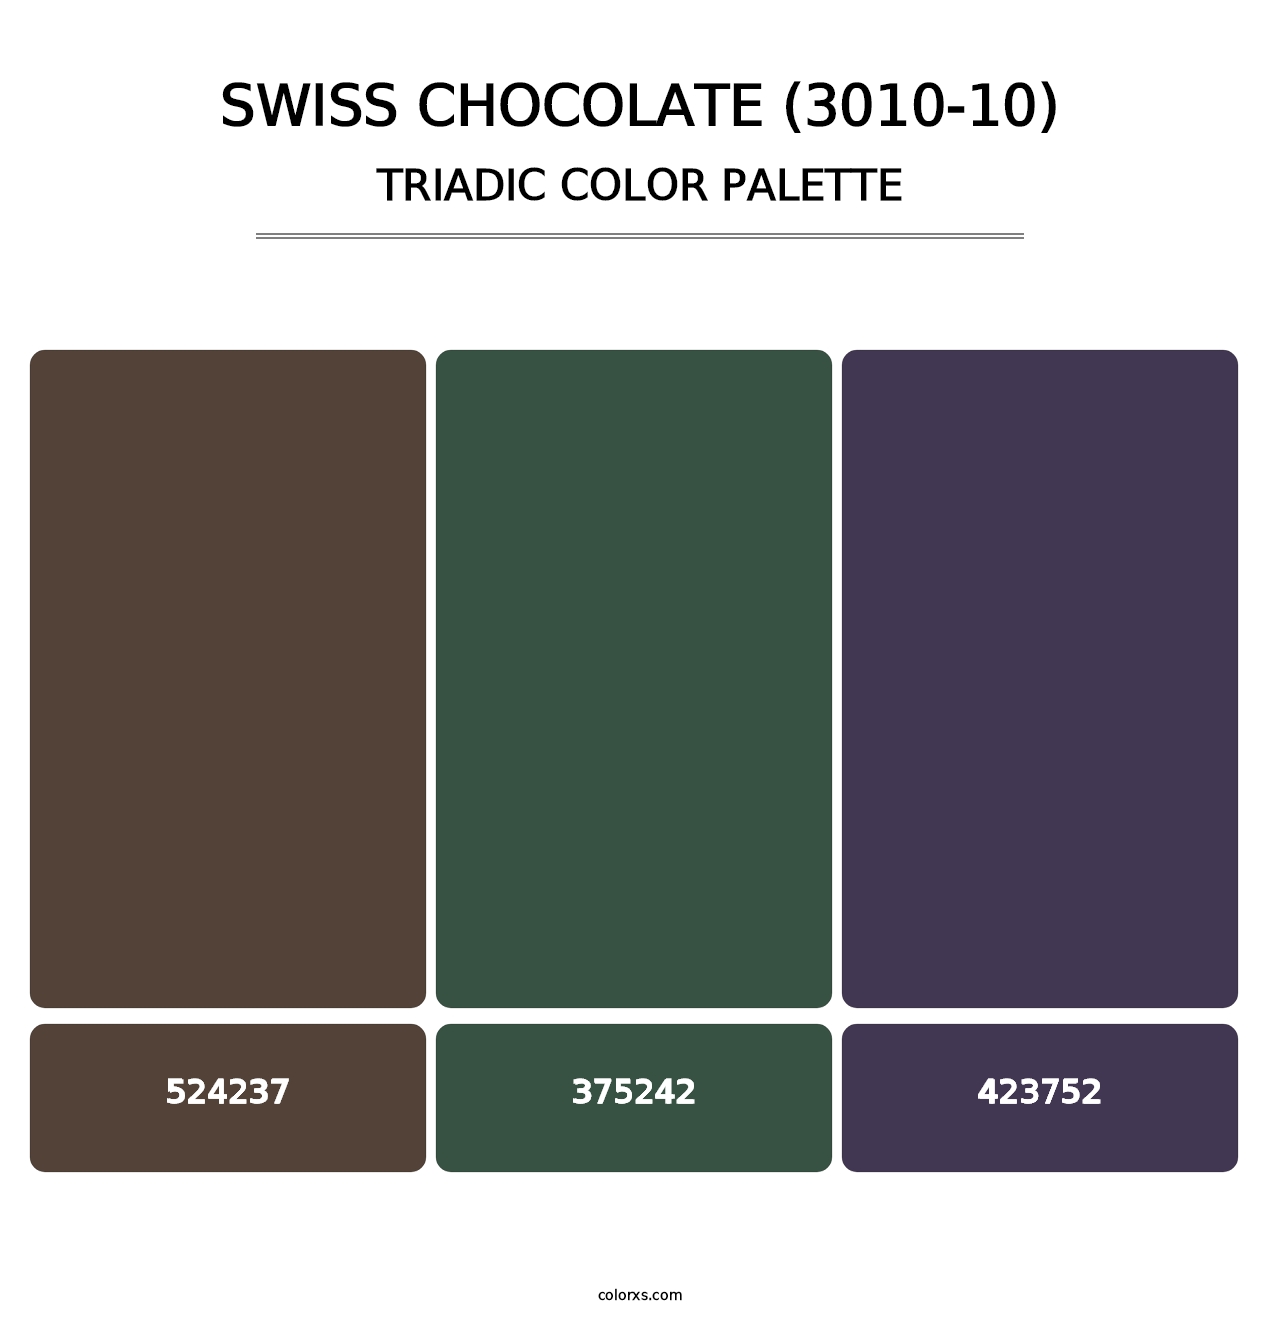 Swiss Chocolate (3010-10) - Triadic Color Palette